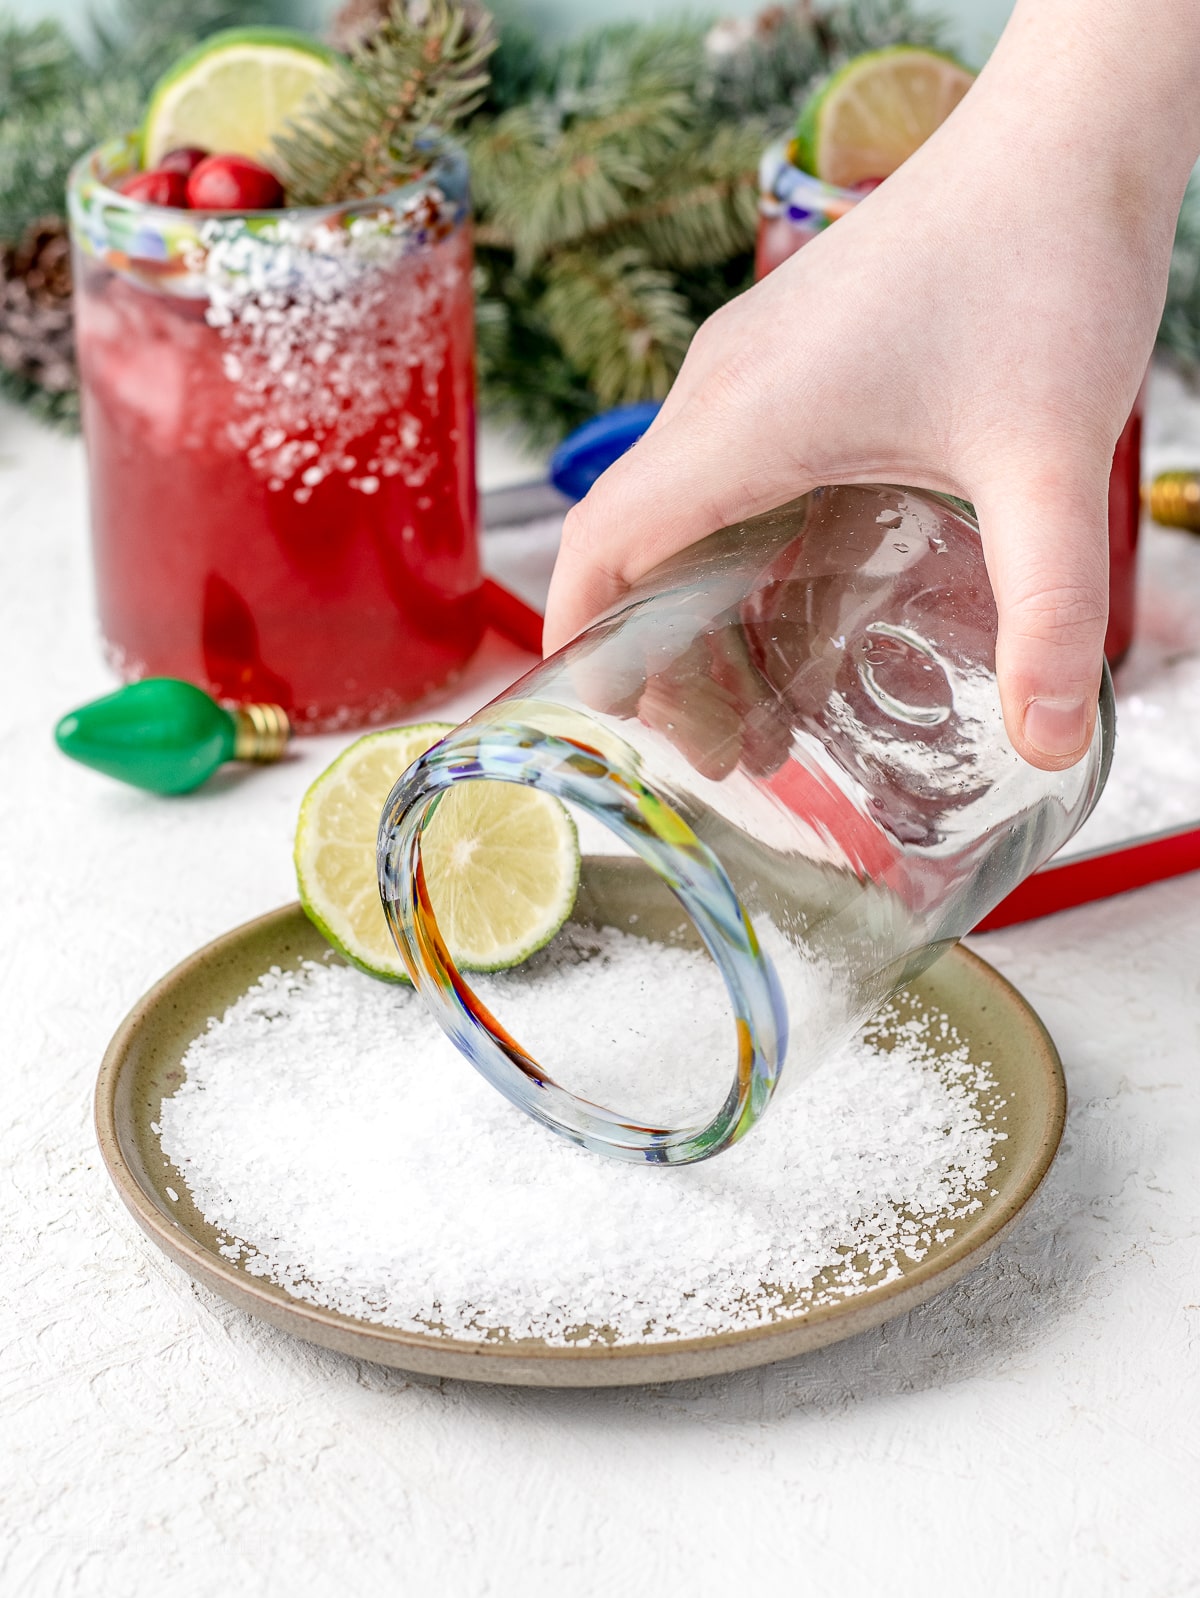 Hand holding a glass and dipping it into a shallow dish of salt.